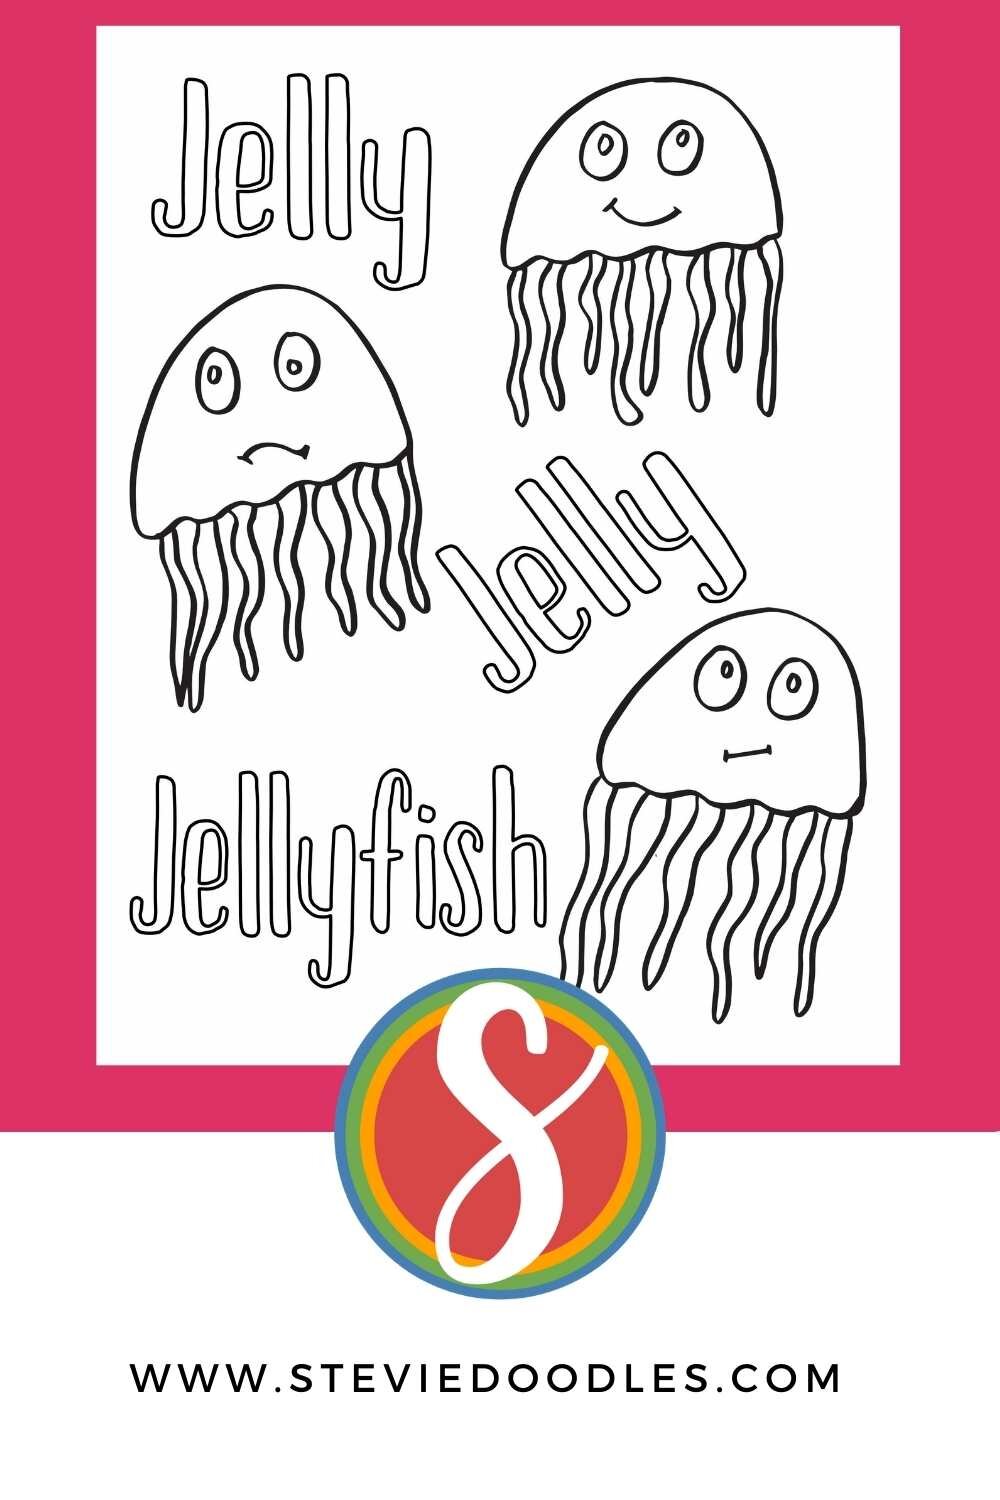 Free Jellyfish moods coloring page from Stevie Doodles